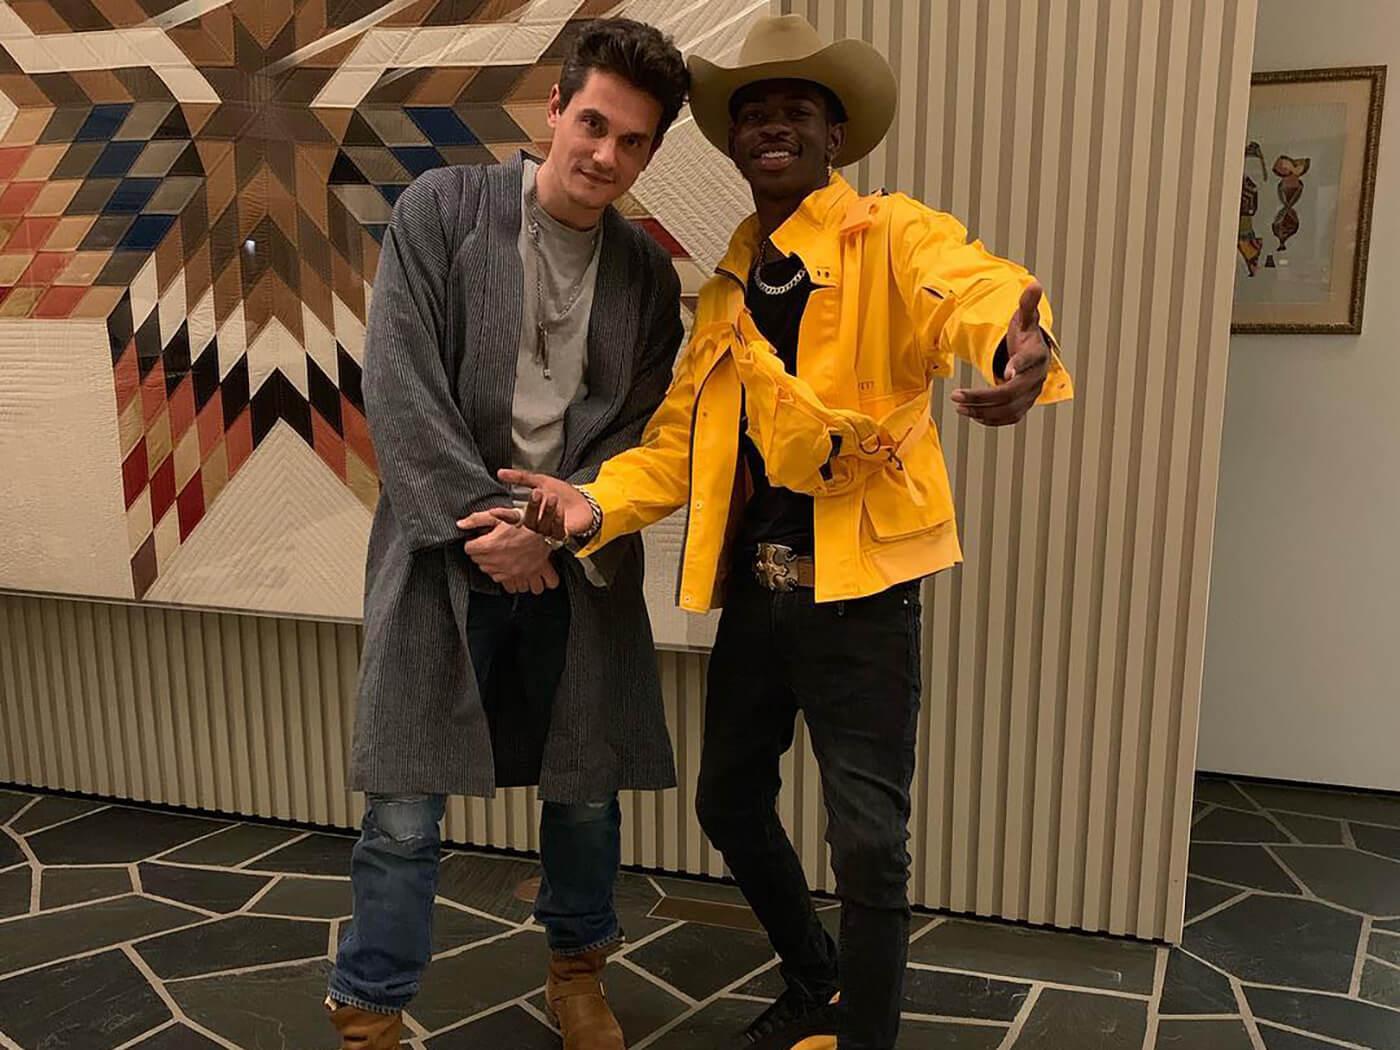 Watch Lil Nas X duet “Old Town Road” with John Mayer